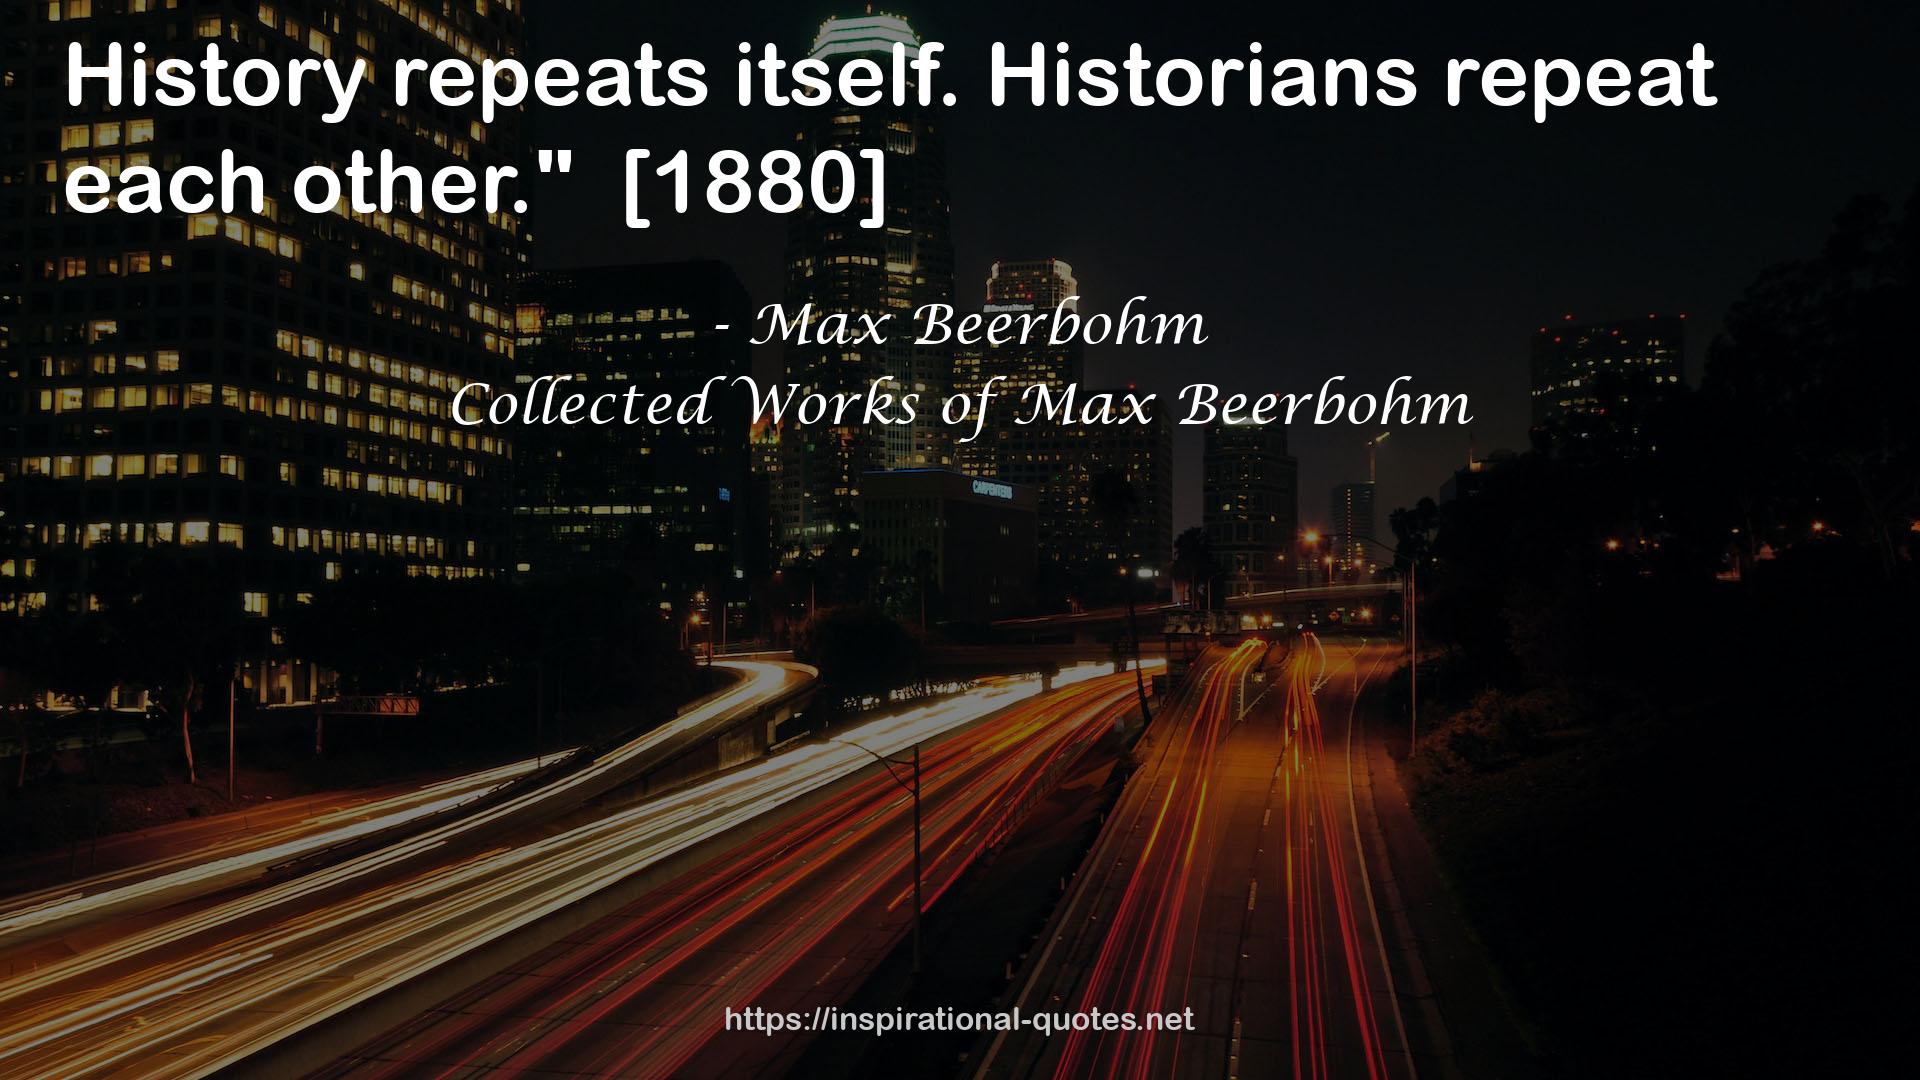 Collected Works of Max Beerbohm QUOTES